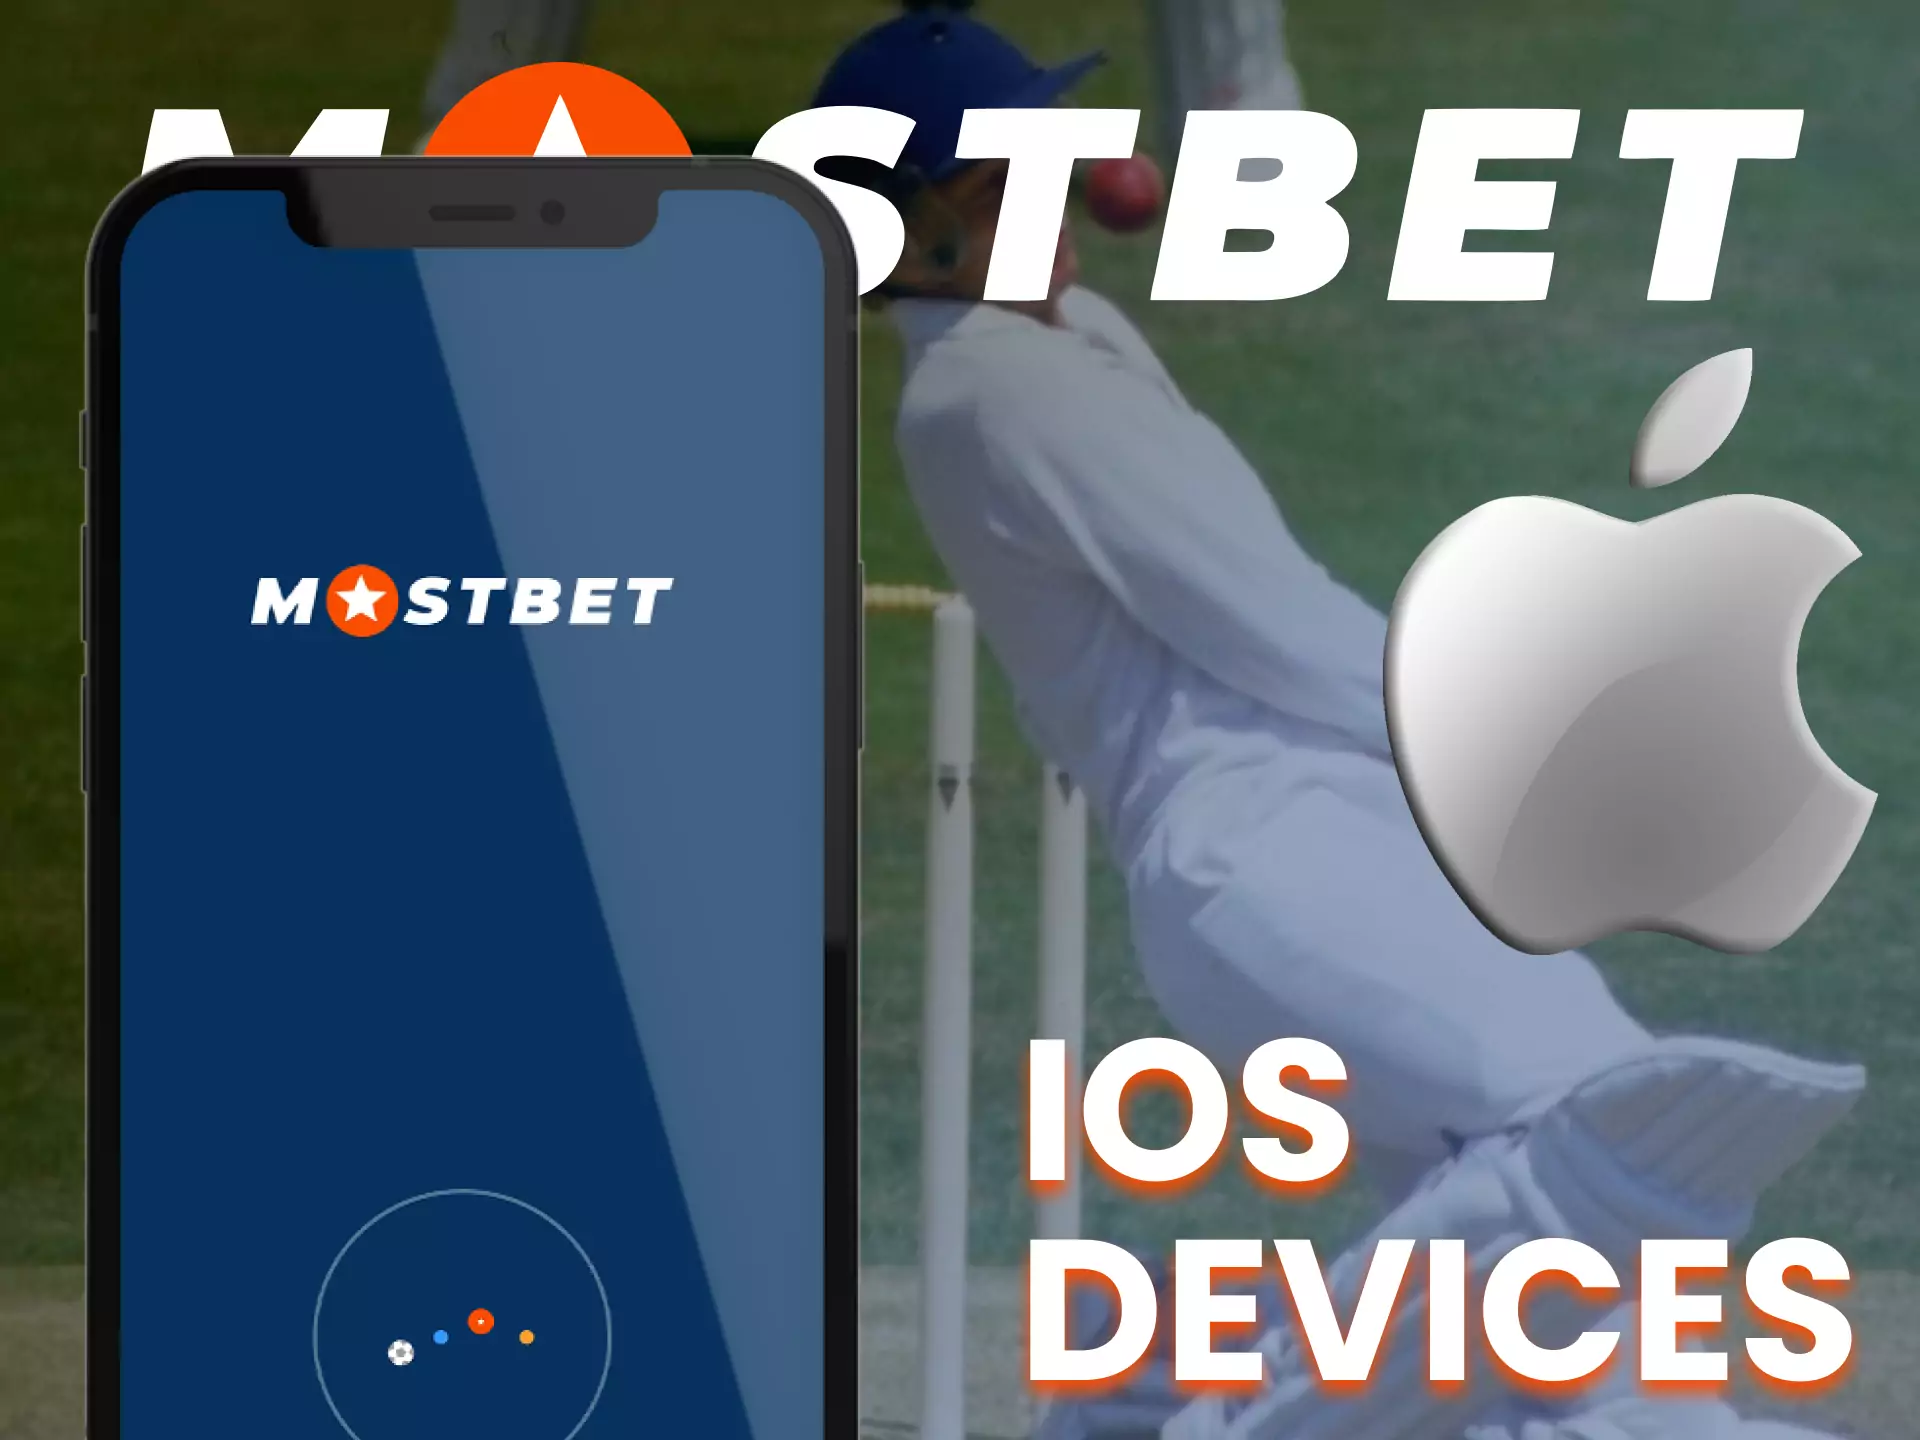 Mostbet app is supported on absolutely different iOS devices.